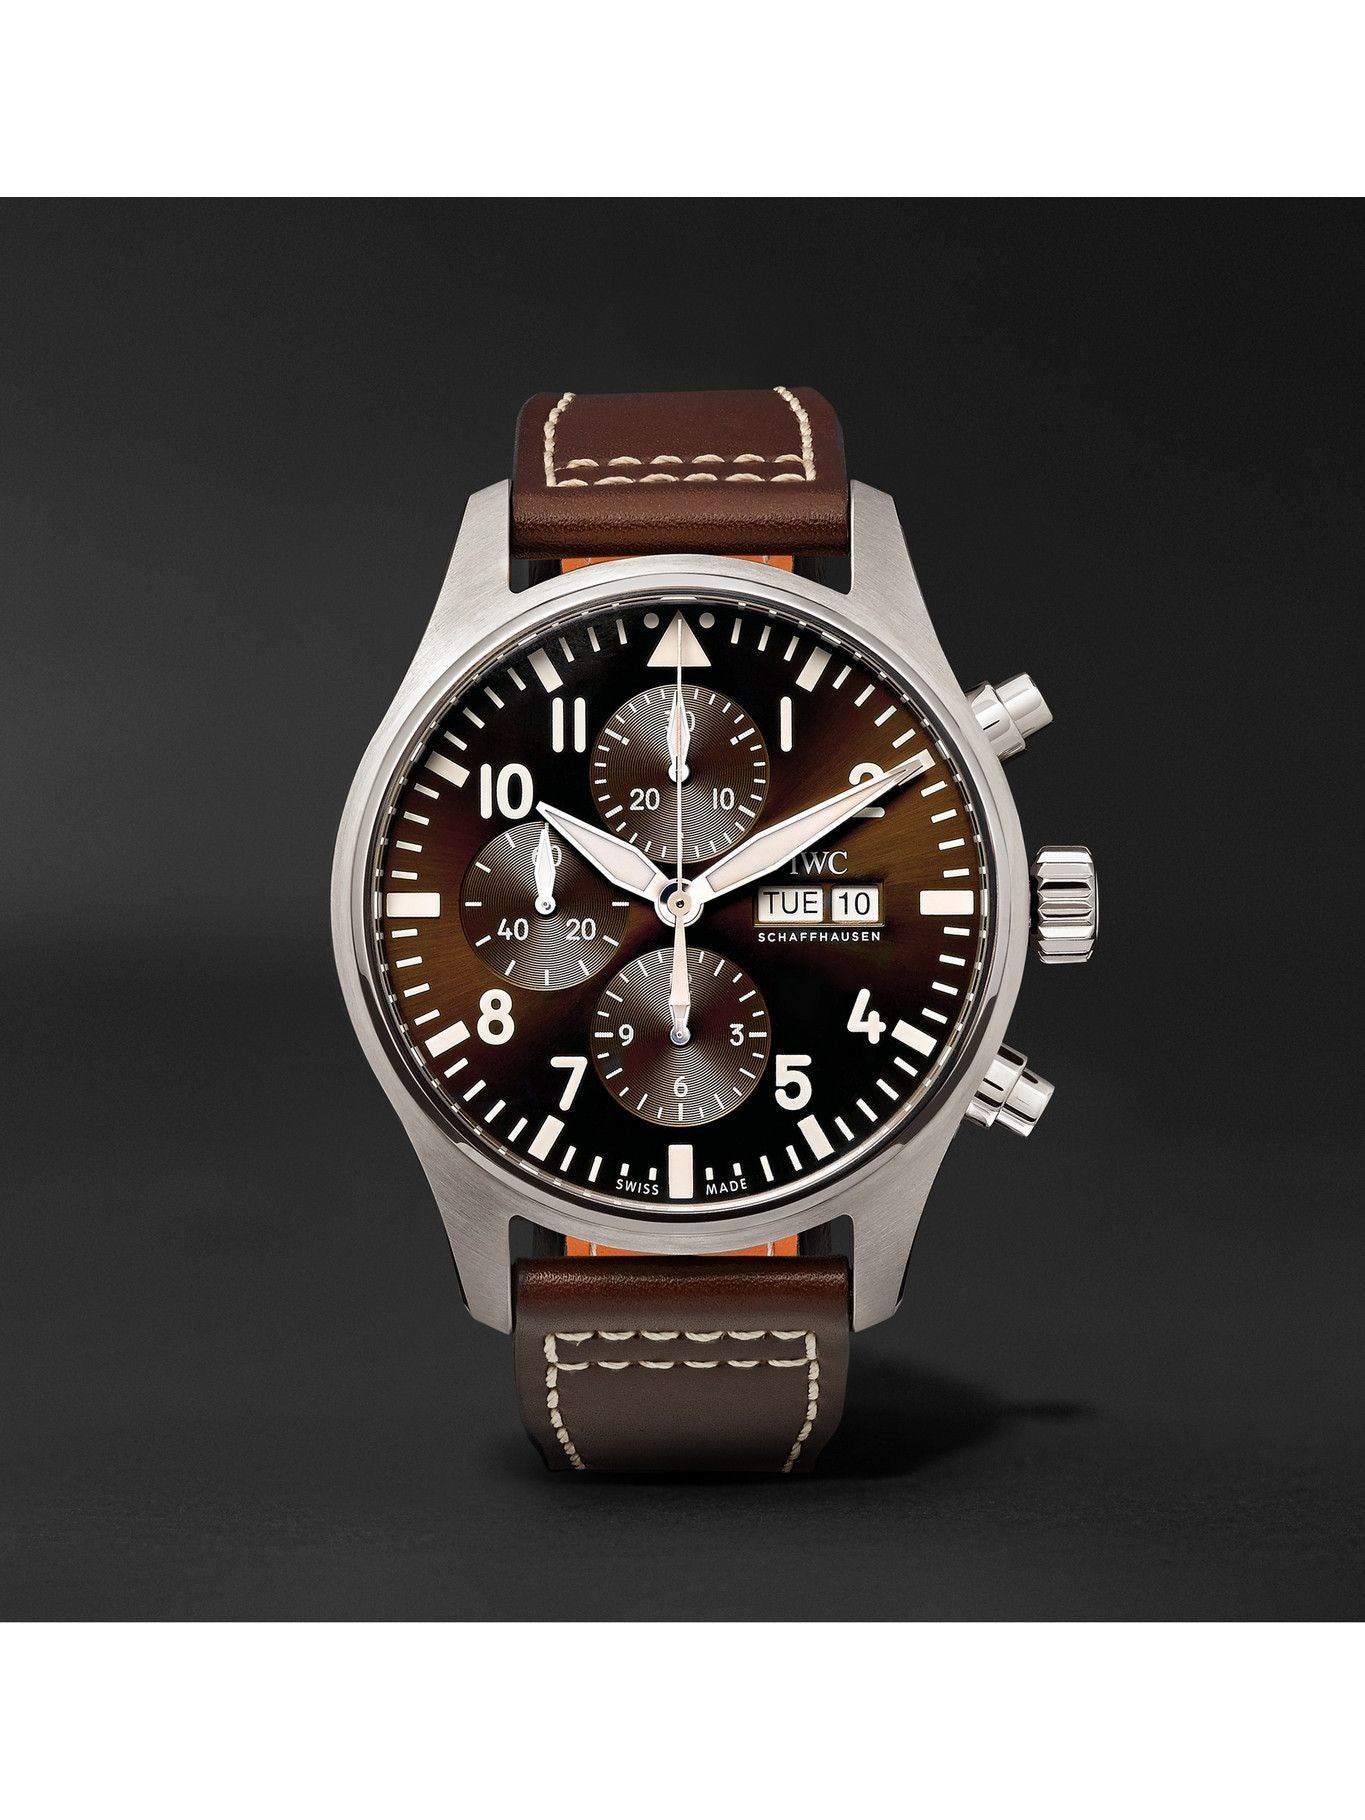 IWC Pilot's Watch Chronograph Edition Brown Dial Brown Leather Strap Watch for Men - IW377713